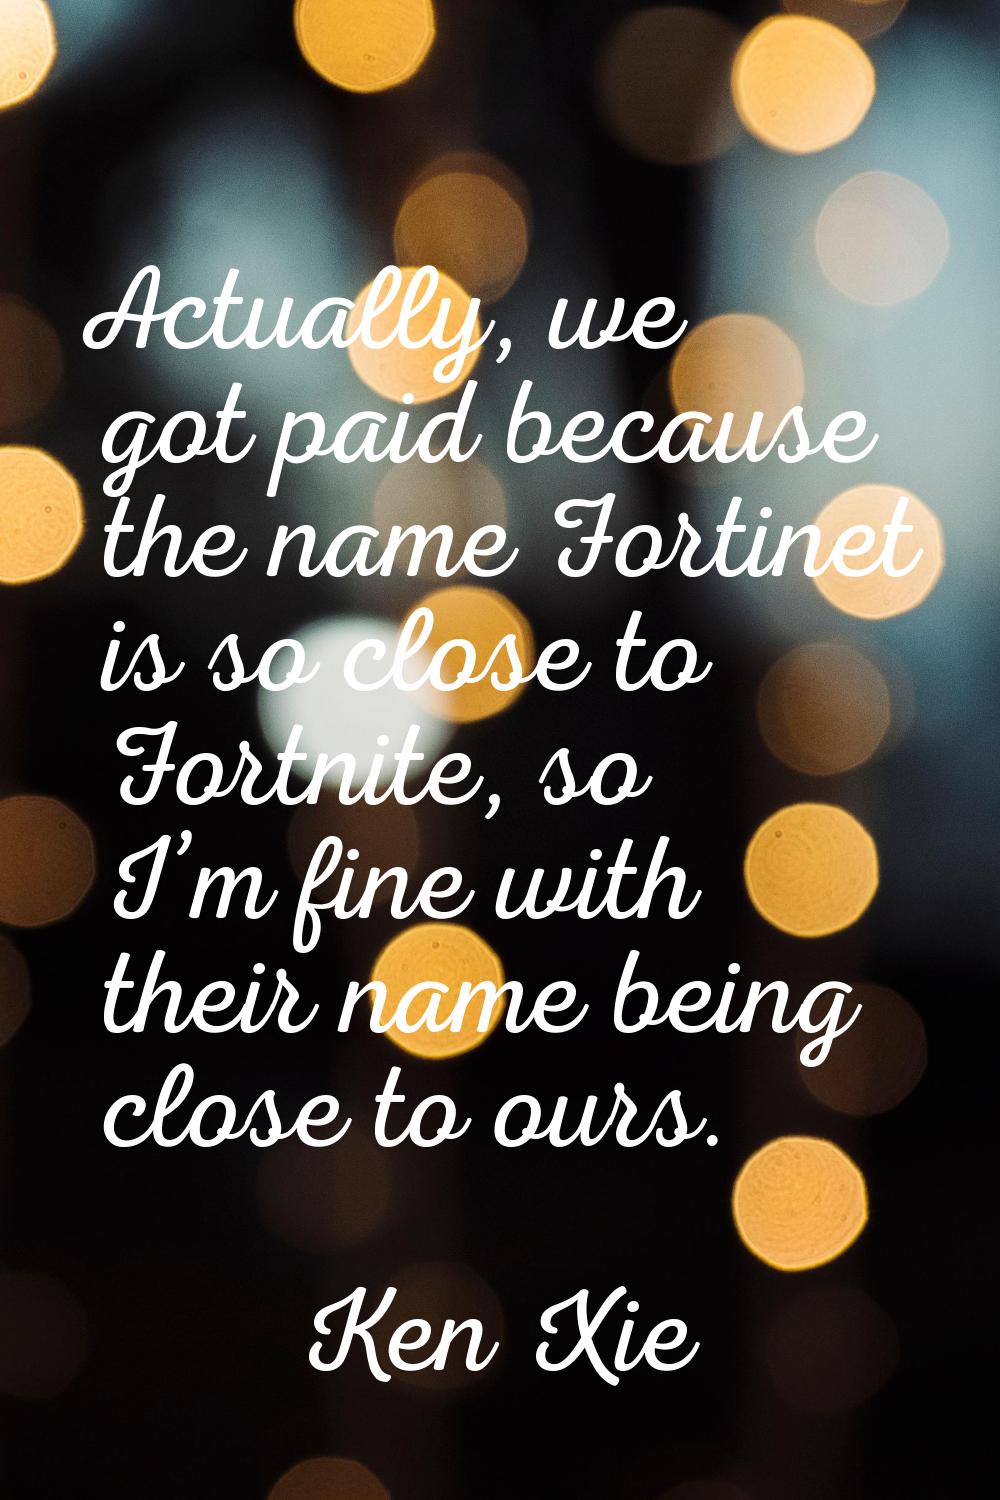 Actually, we got paid because the name Fortinet is so close to Fortnite, so I’m fine with their nam